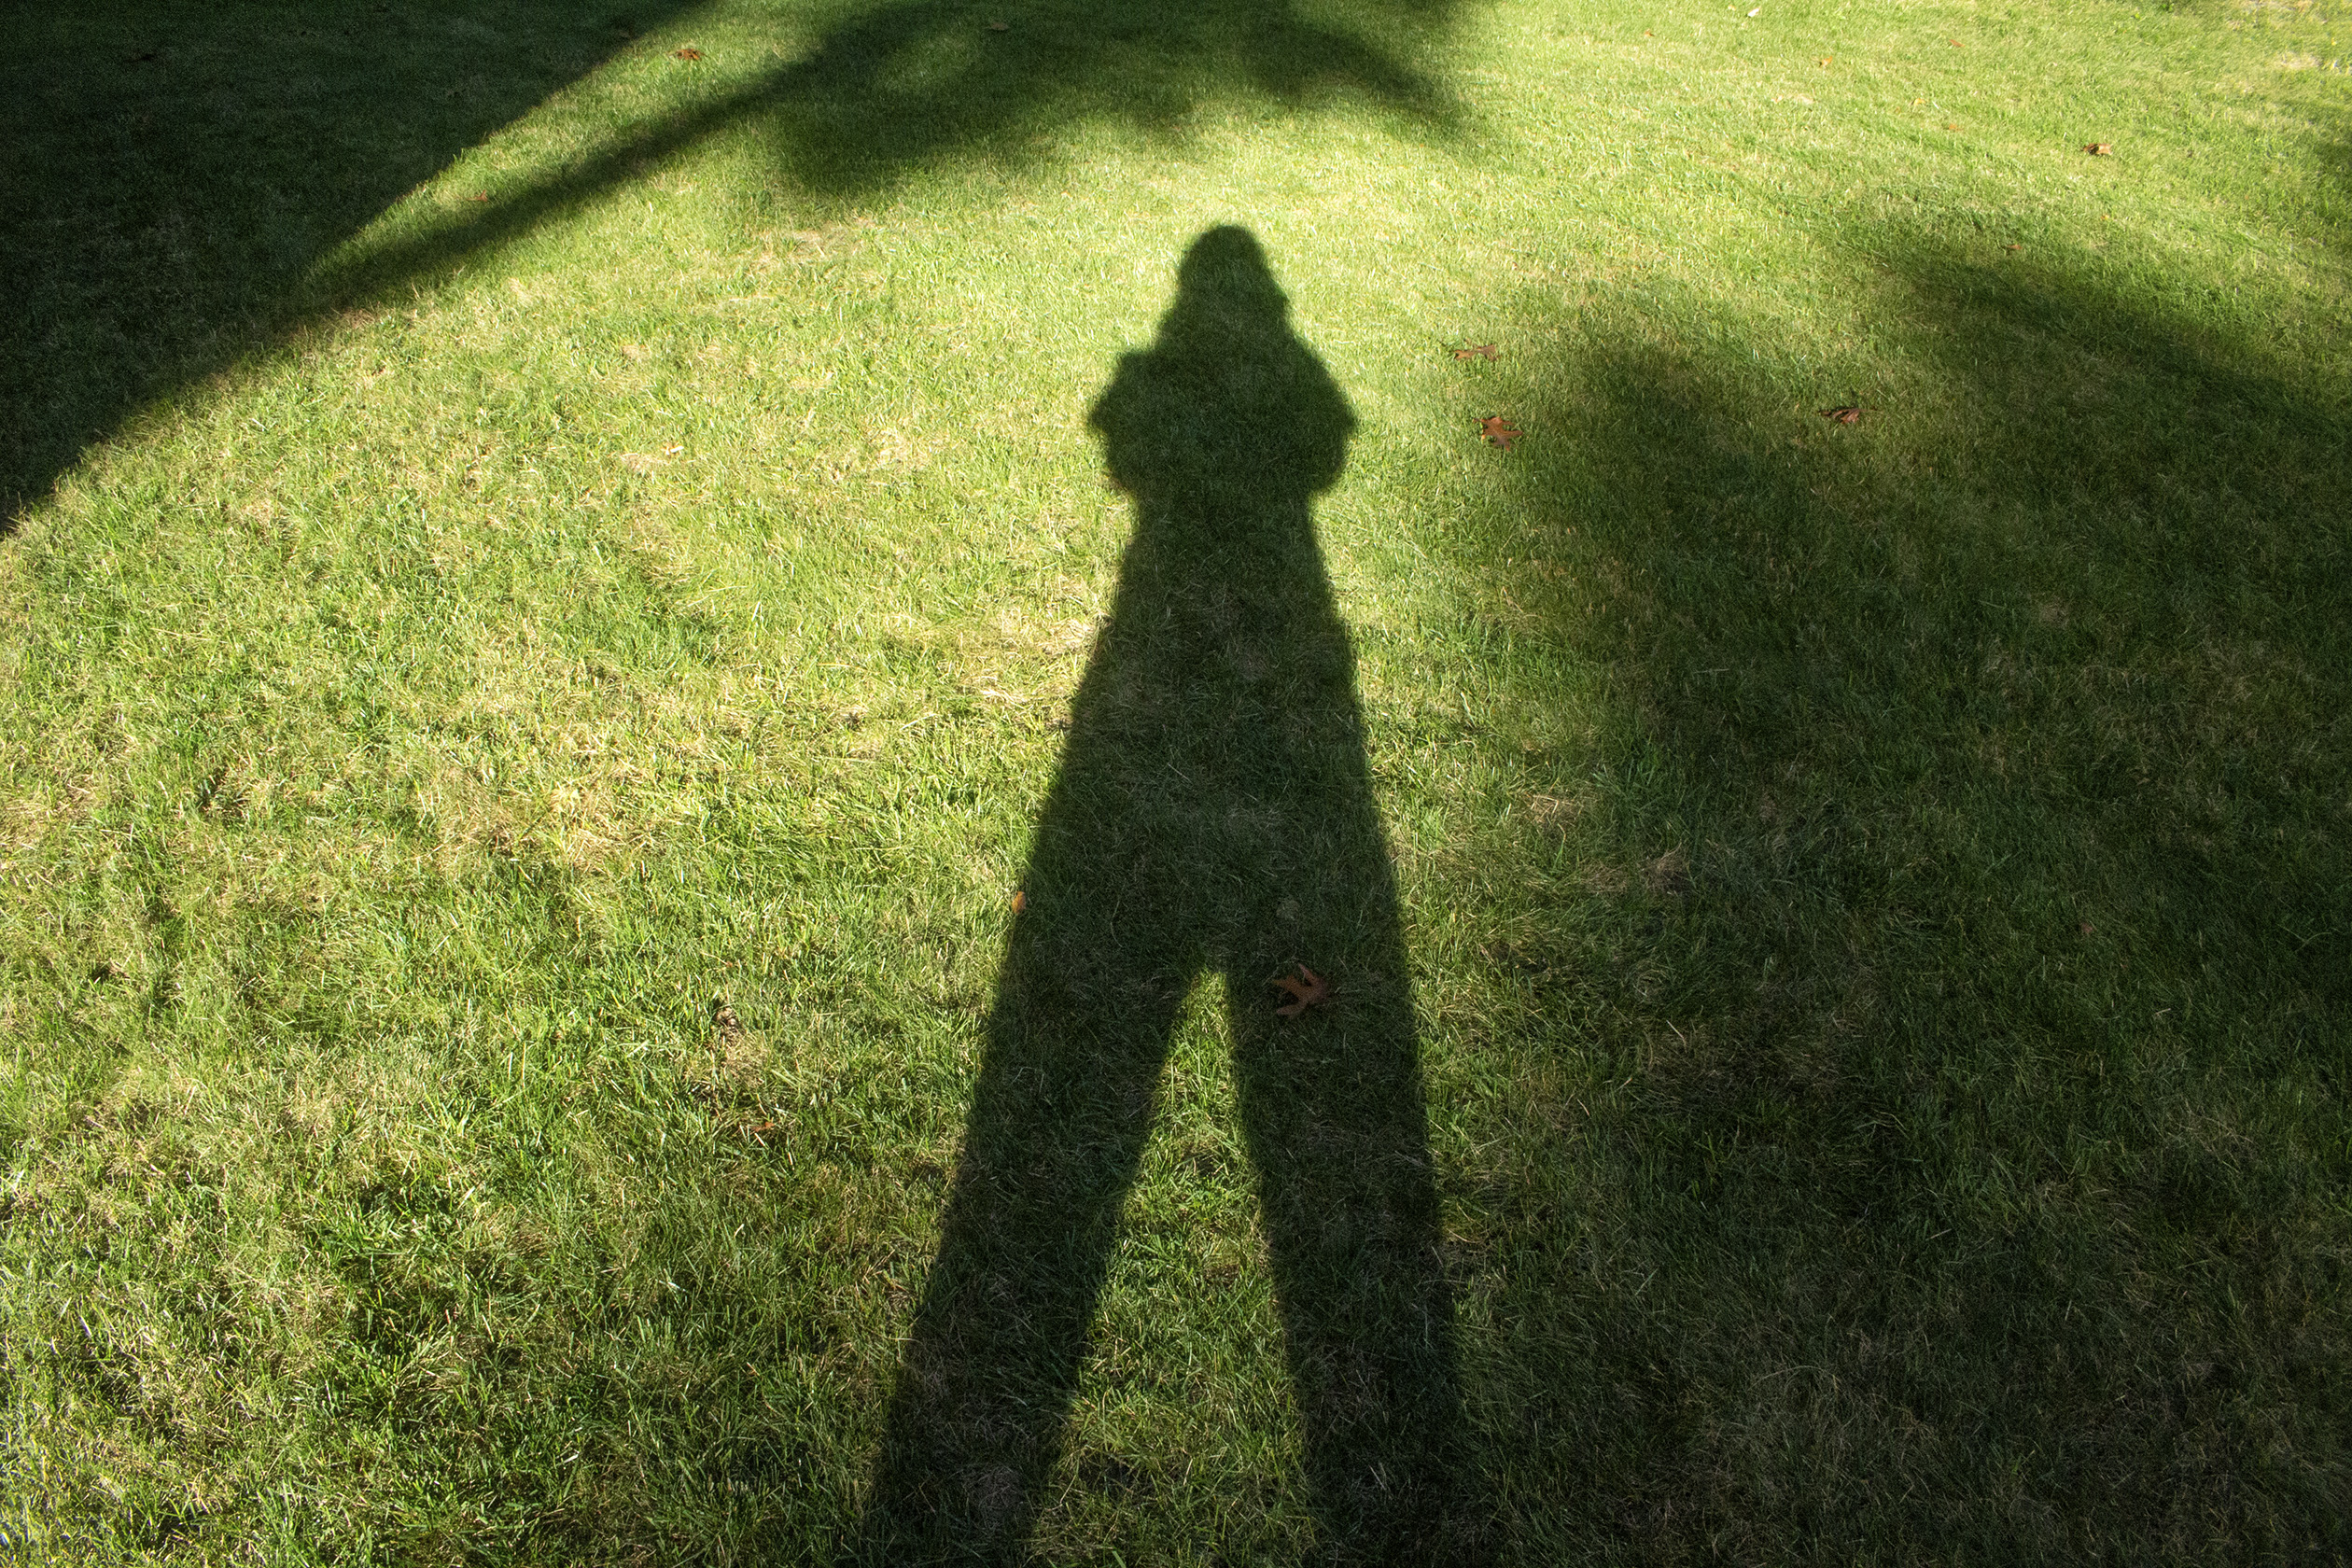 photograph of Katie May Howarth's shadow on a lawn of bright green grass